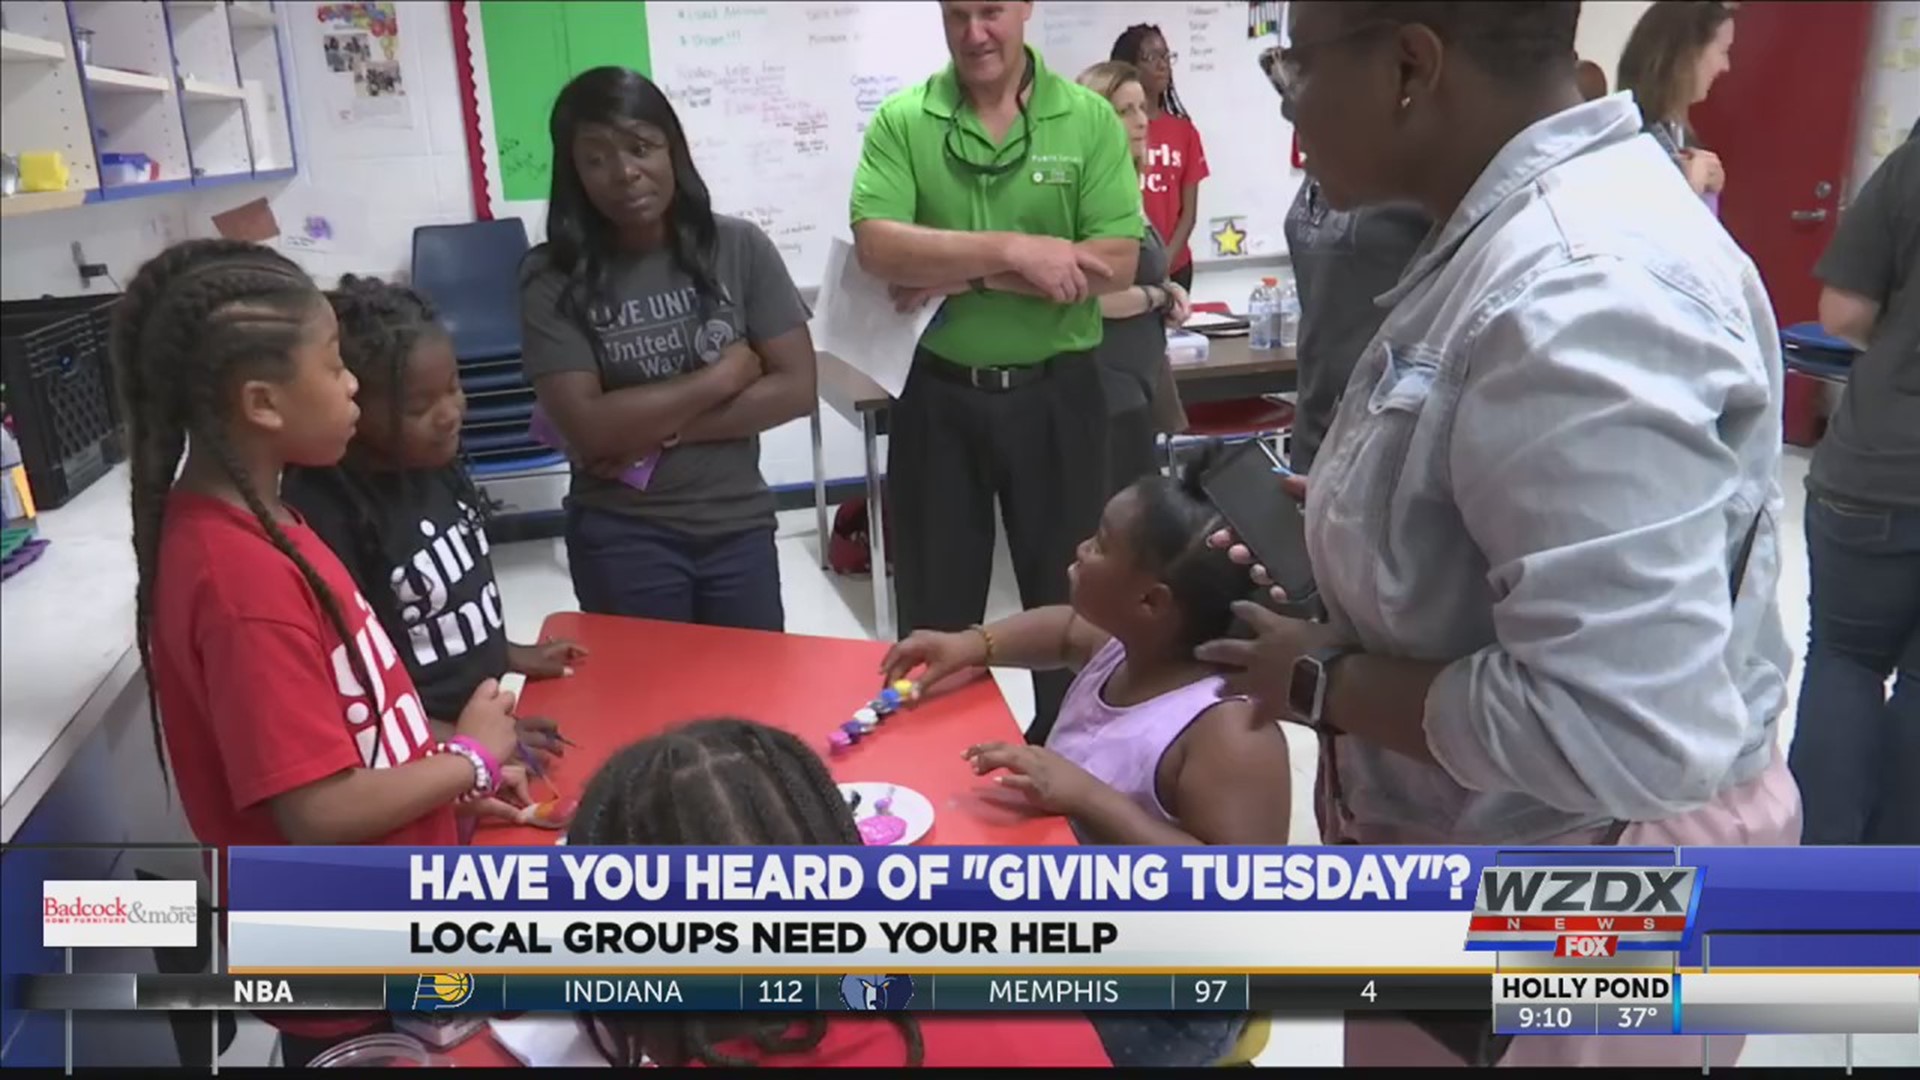 fter all the spending you do on Black Friday and Cyber Monday, local groups are asking you to put a little bit of that money to the side and help somebody else’s holiday wishes come true. Giving Tuesday is coming up and there are a lot of groups here in the Tennessee Valley that need your help.